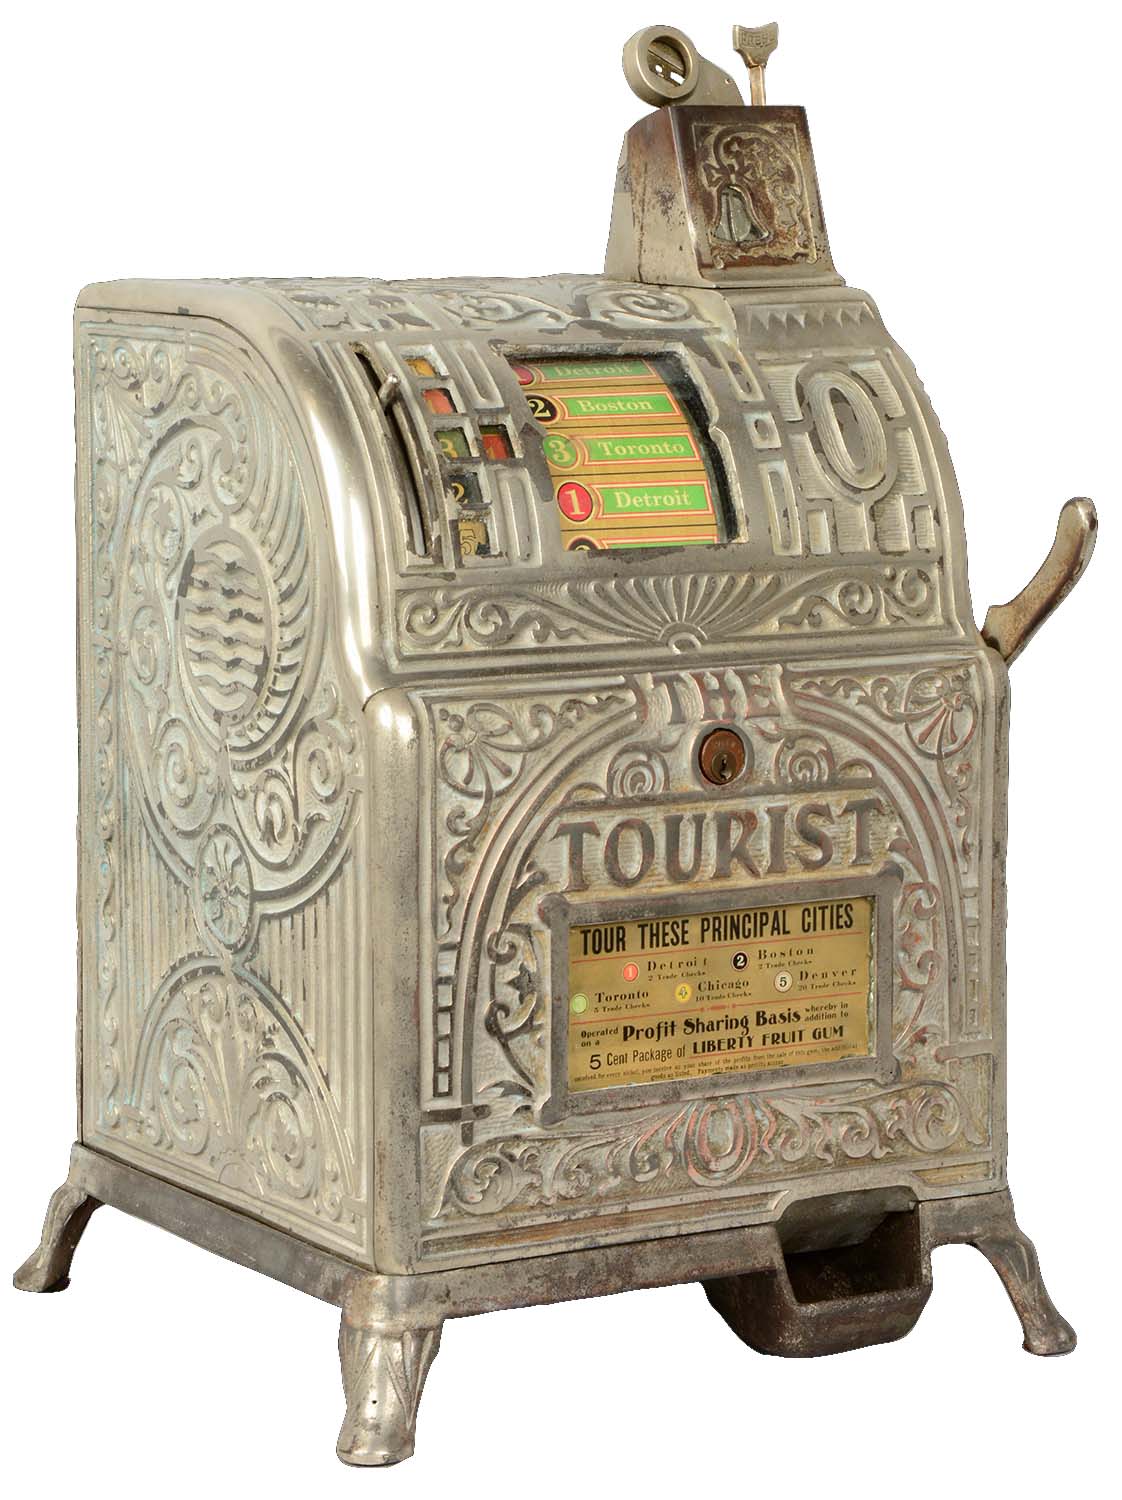 5¢ Caille Bros. "The Tourist" Slot Machine, estimated at $40,000-60,000.